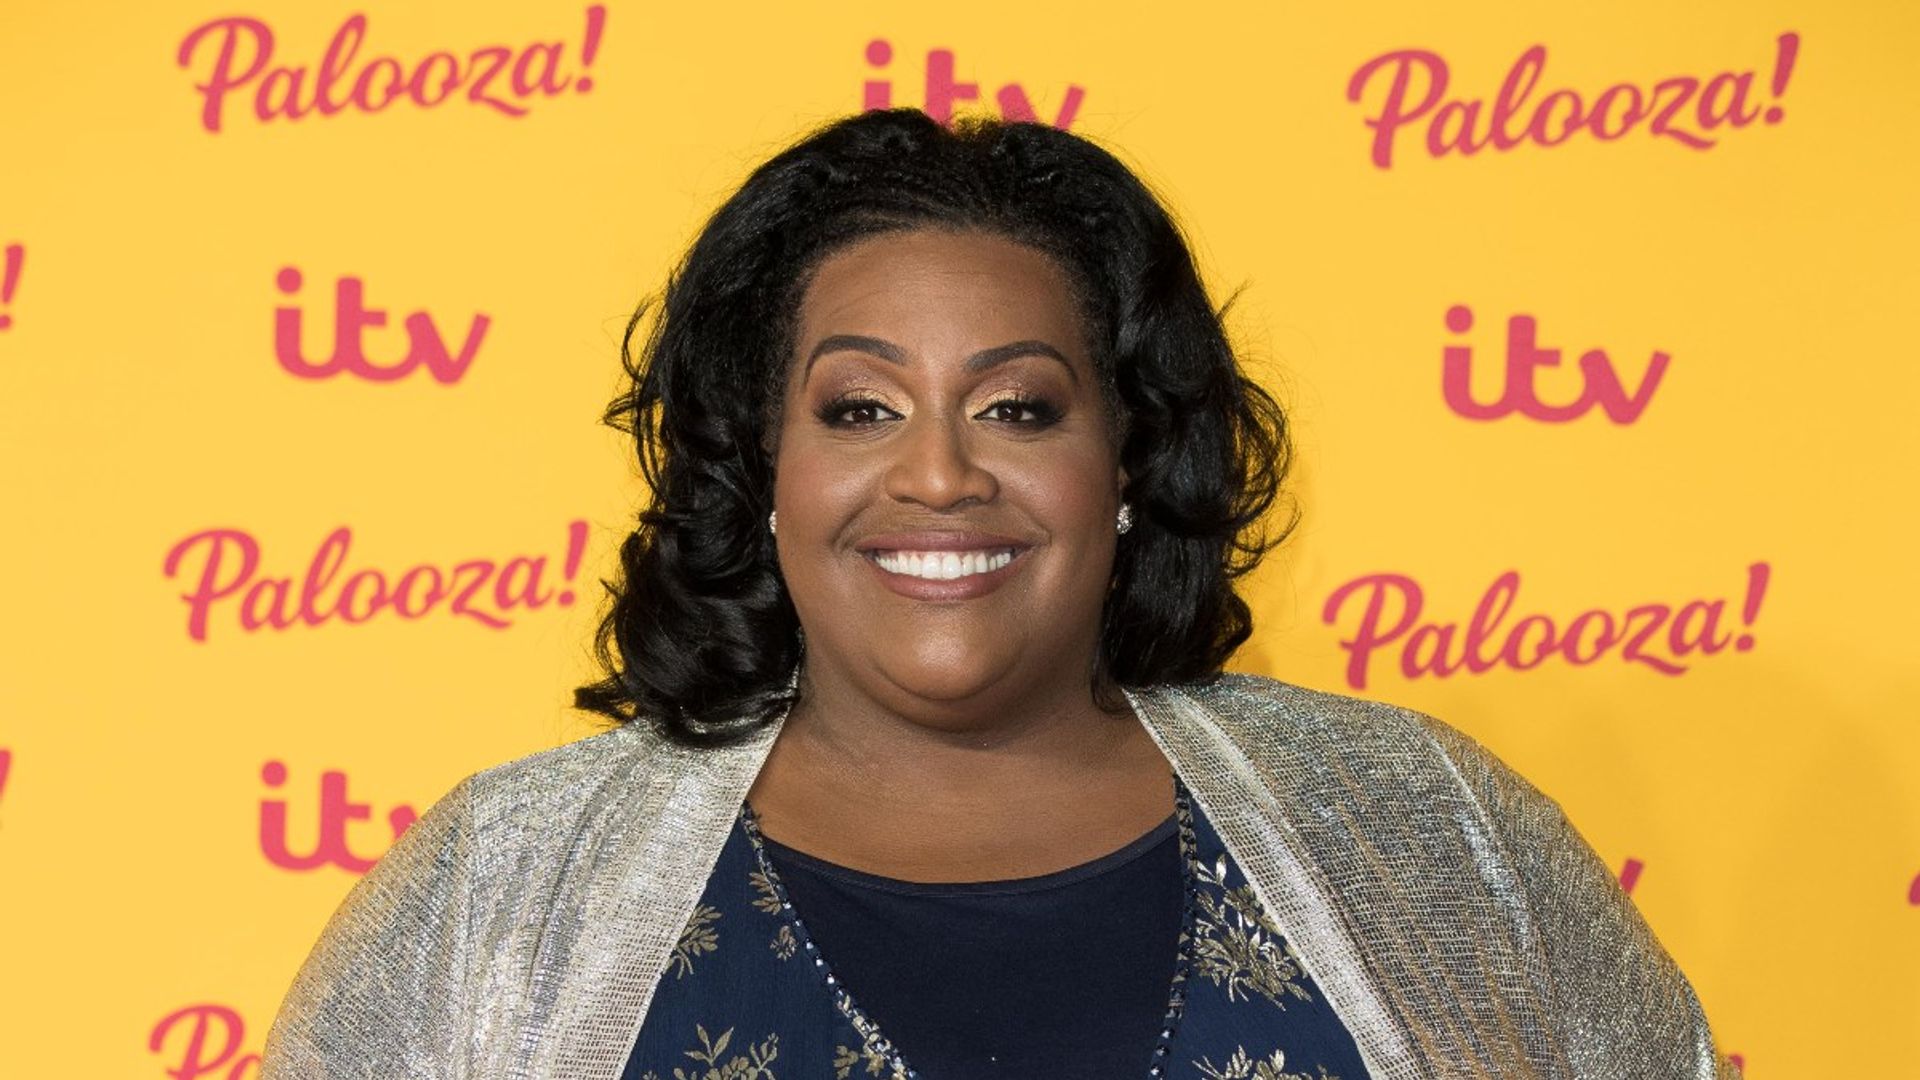 Alison Hammond thrilled after being revealed as popstar’s celebrity crush